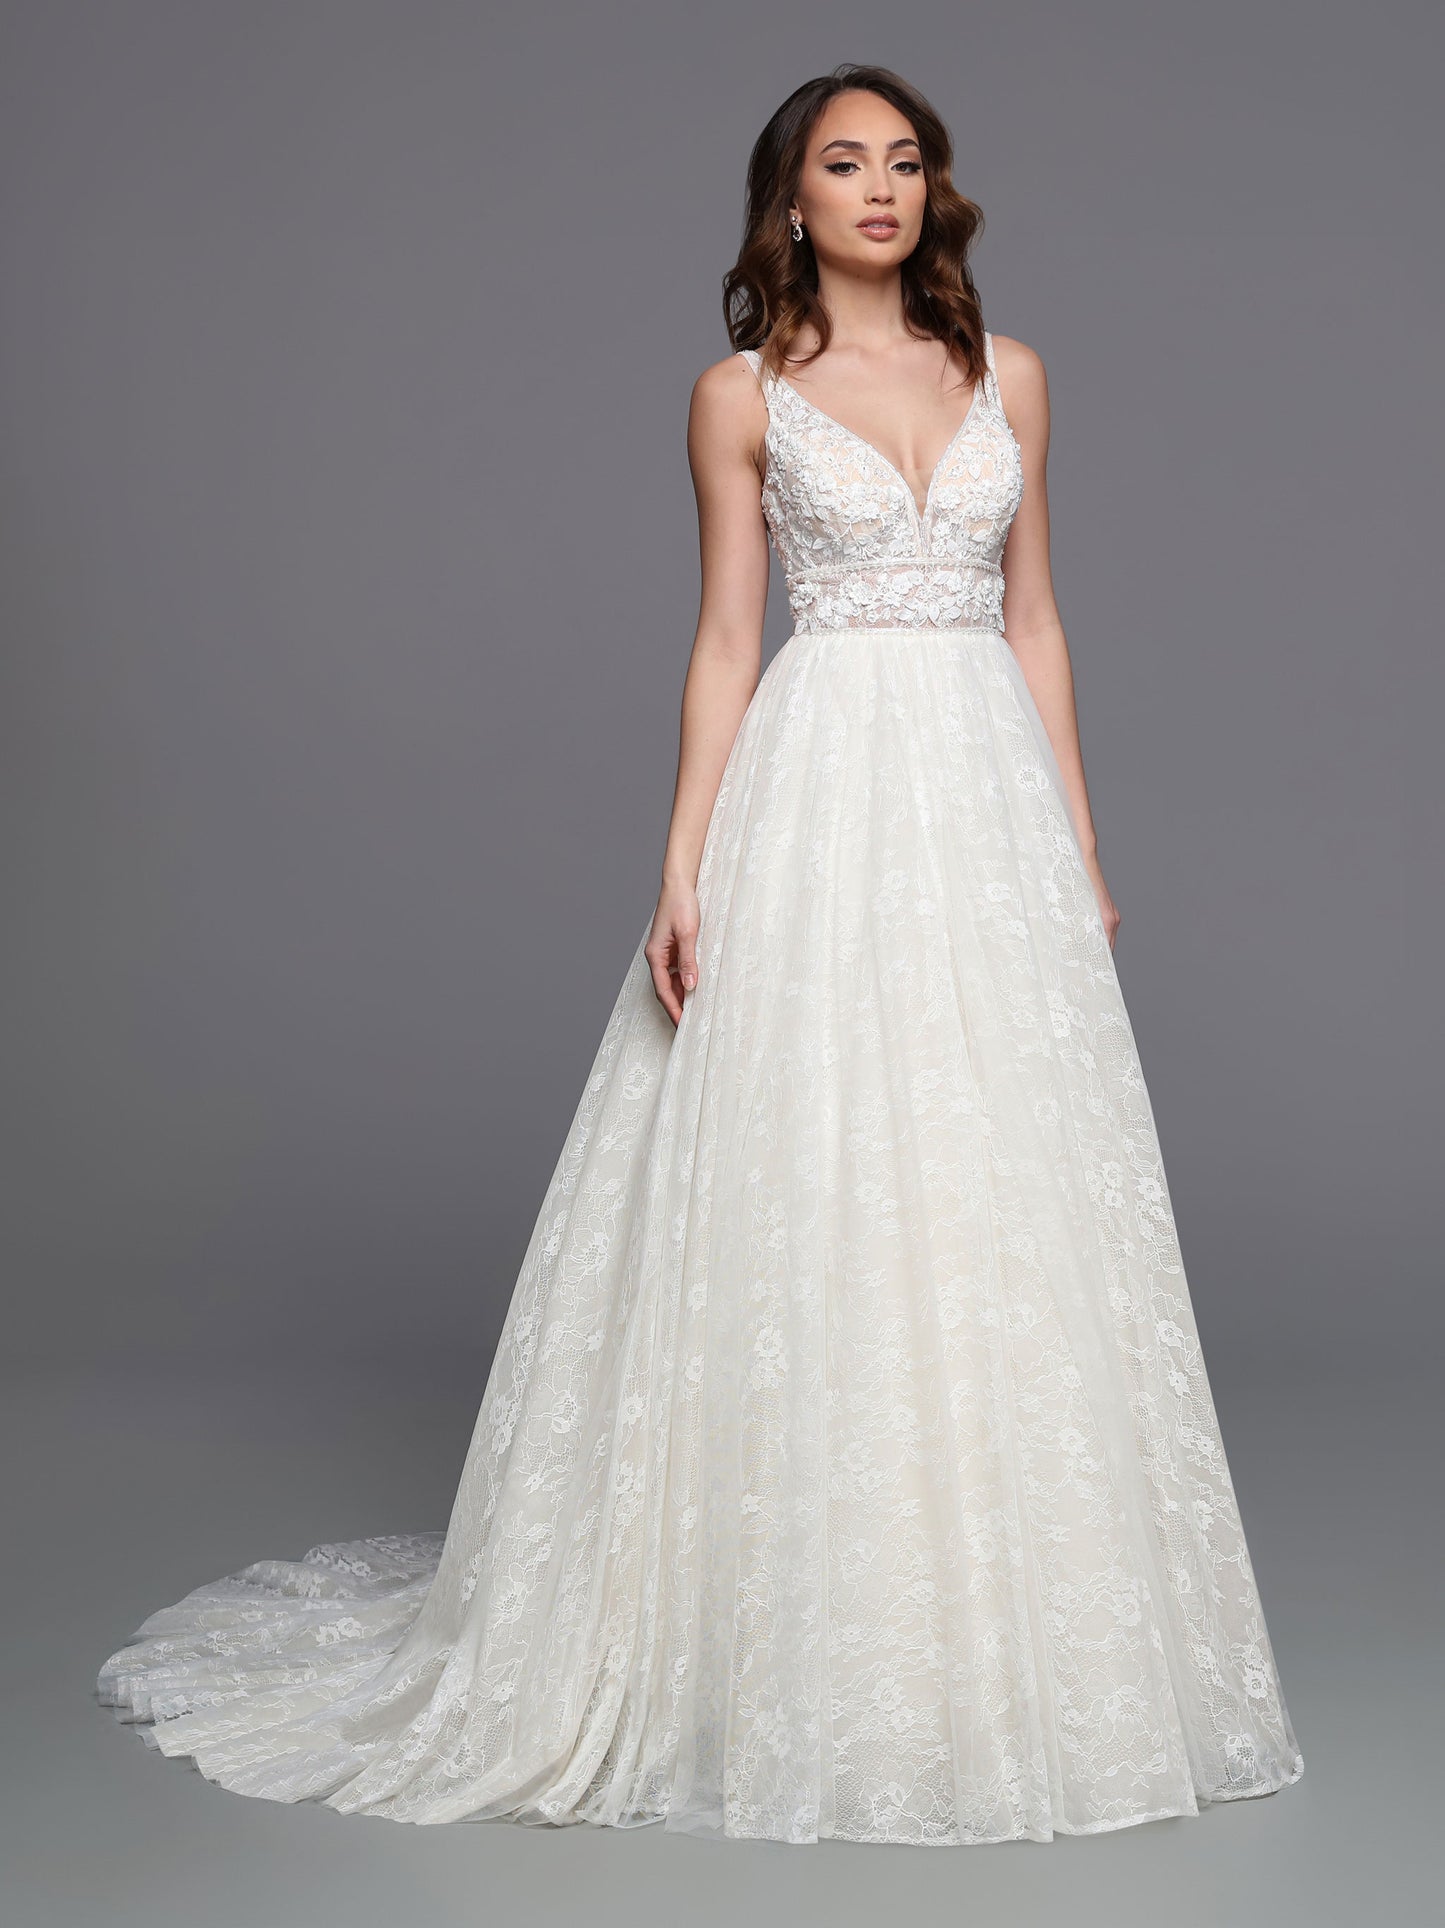 Davinci Bridal 50726 A-Line Ballgown Lace Applique Open Back Train Sequins Wedding Gown. Layers of gathered tulle in the skirt contrast with the beaded lace bodice of this A-line dress with its open back and wide empire-style waistband.